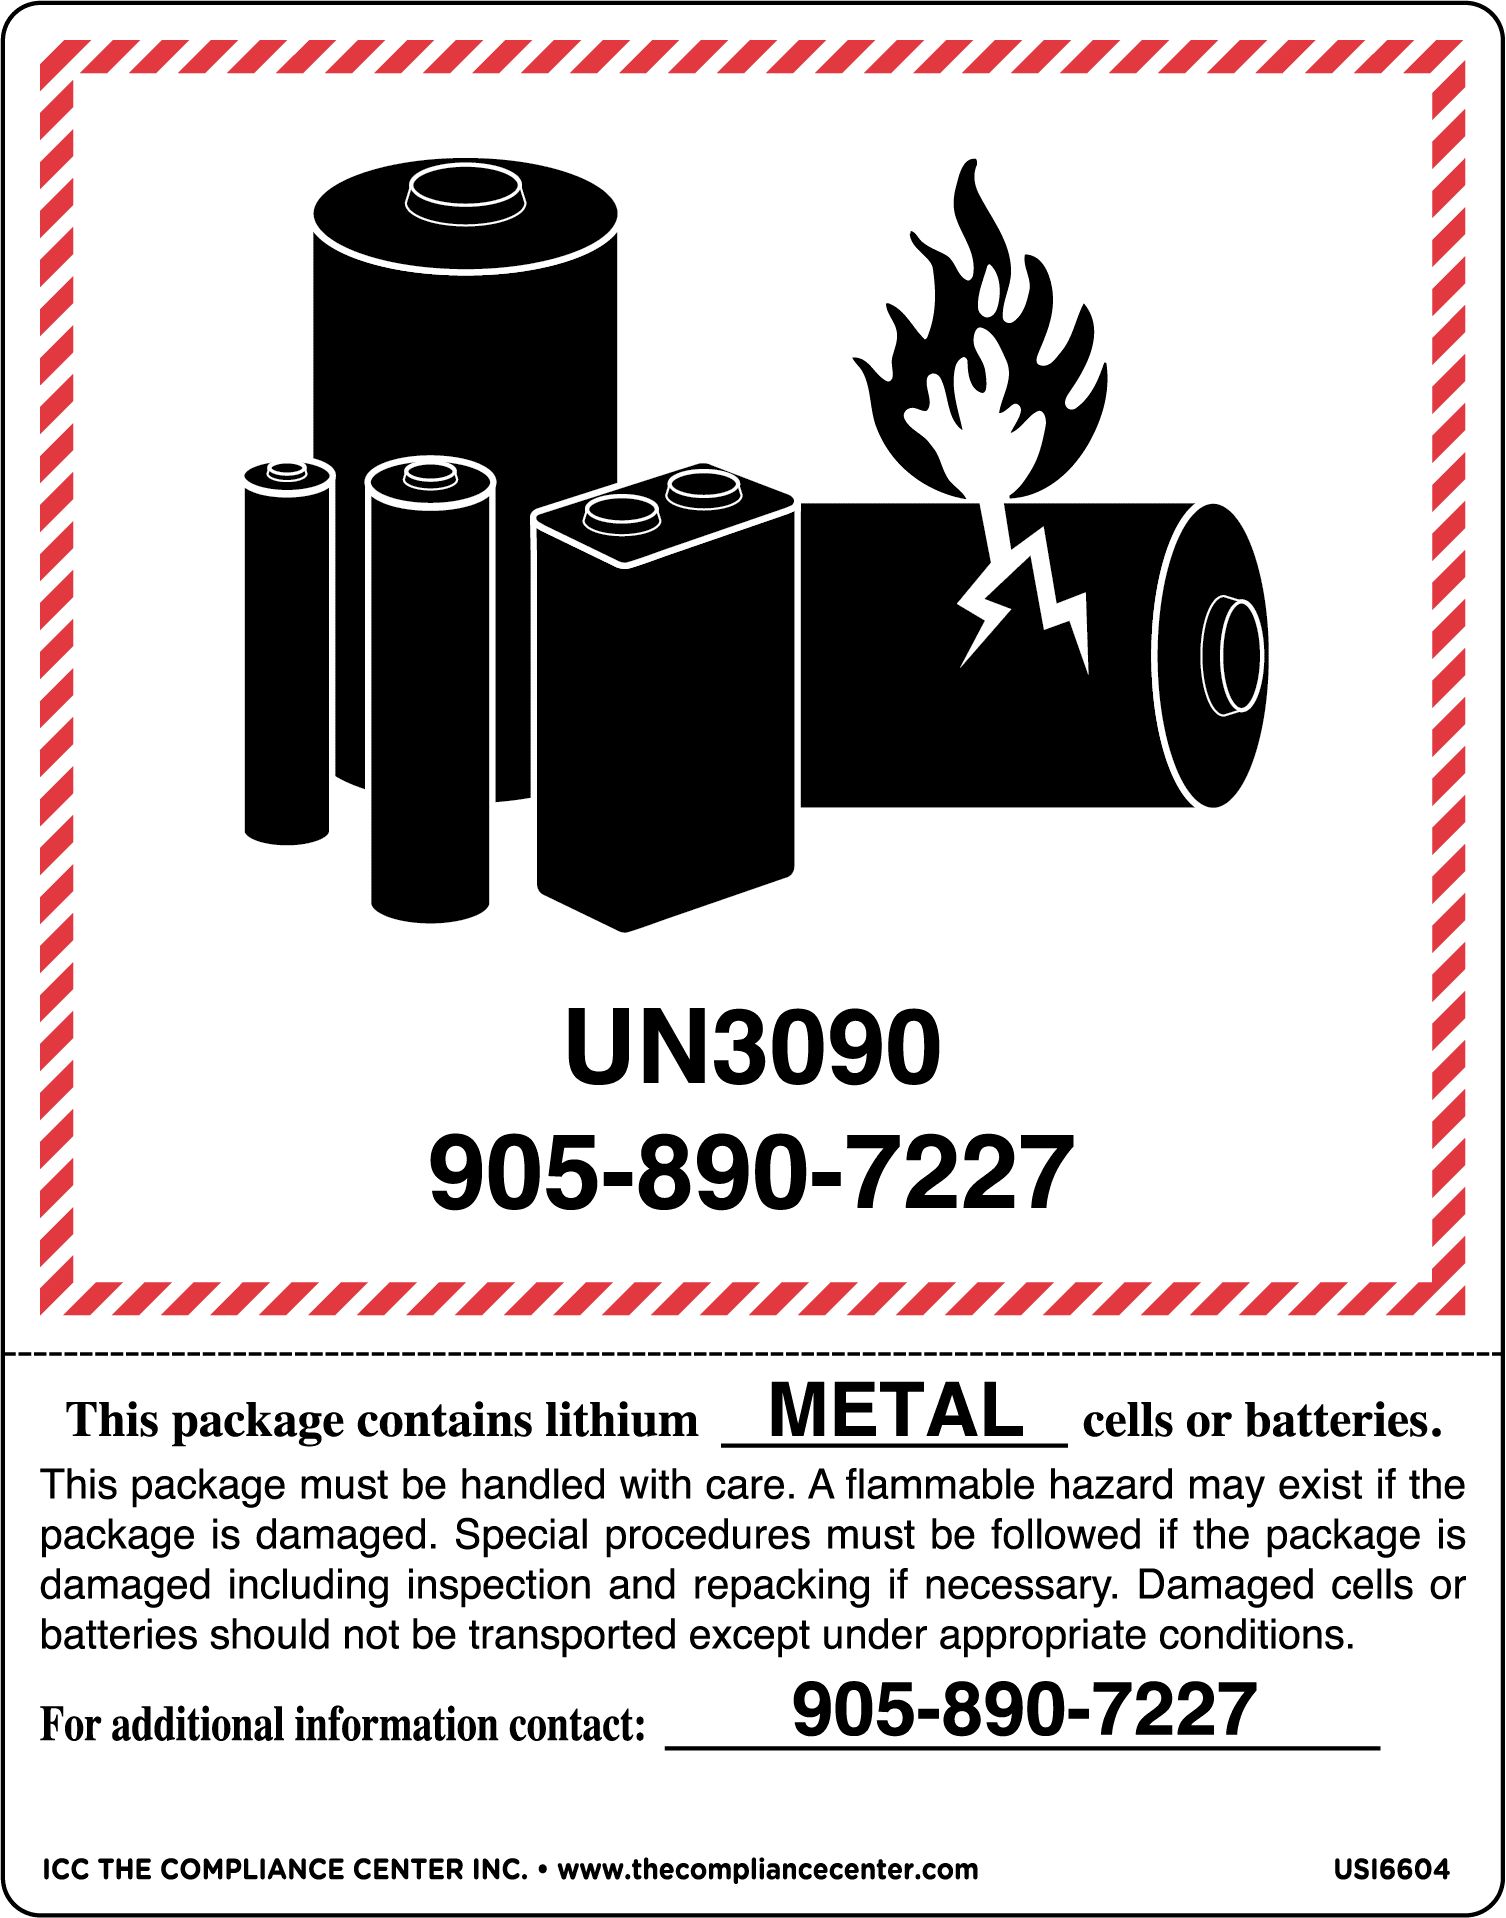 Preprinted Lithium Battery Pictogram with Hazard Statement, 6.375" x 5", Gloss Paper, 500/Roll - ICC USA